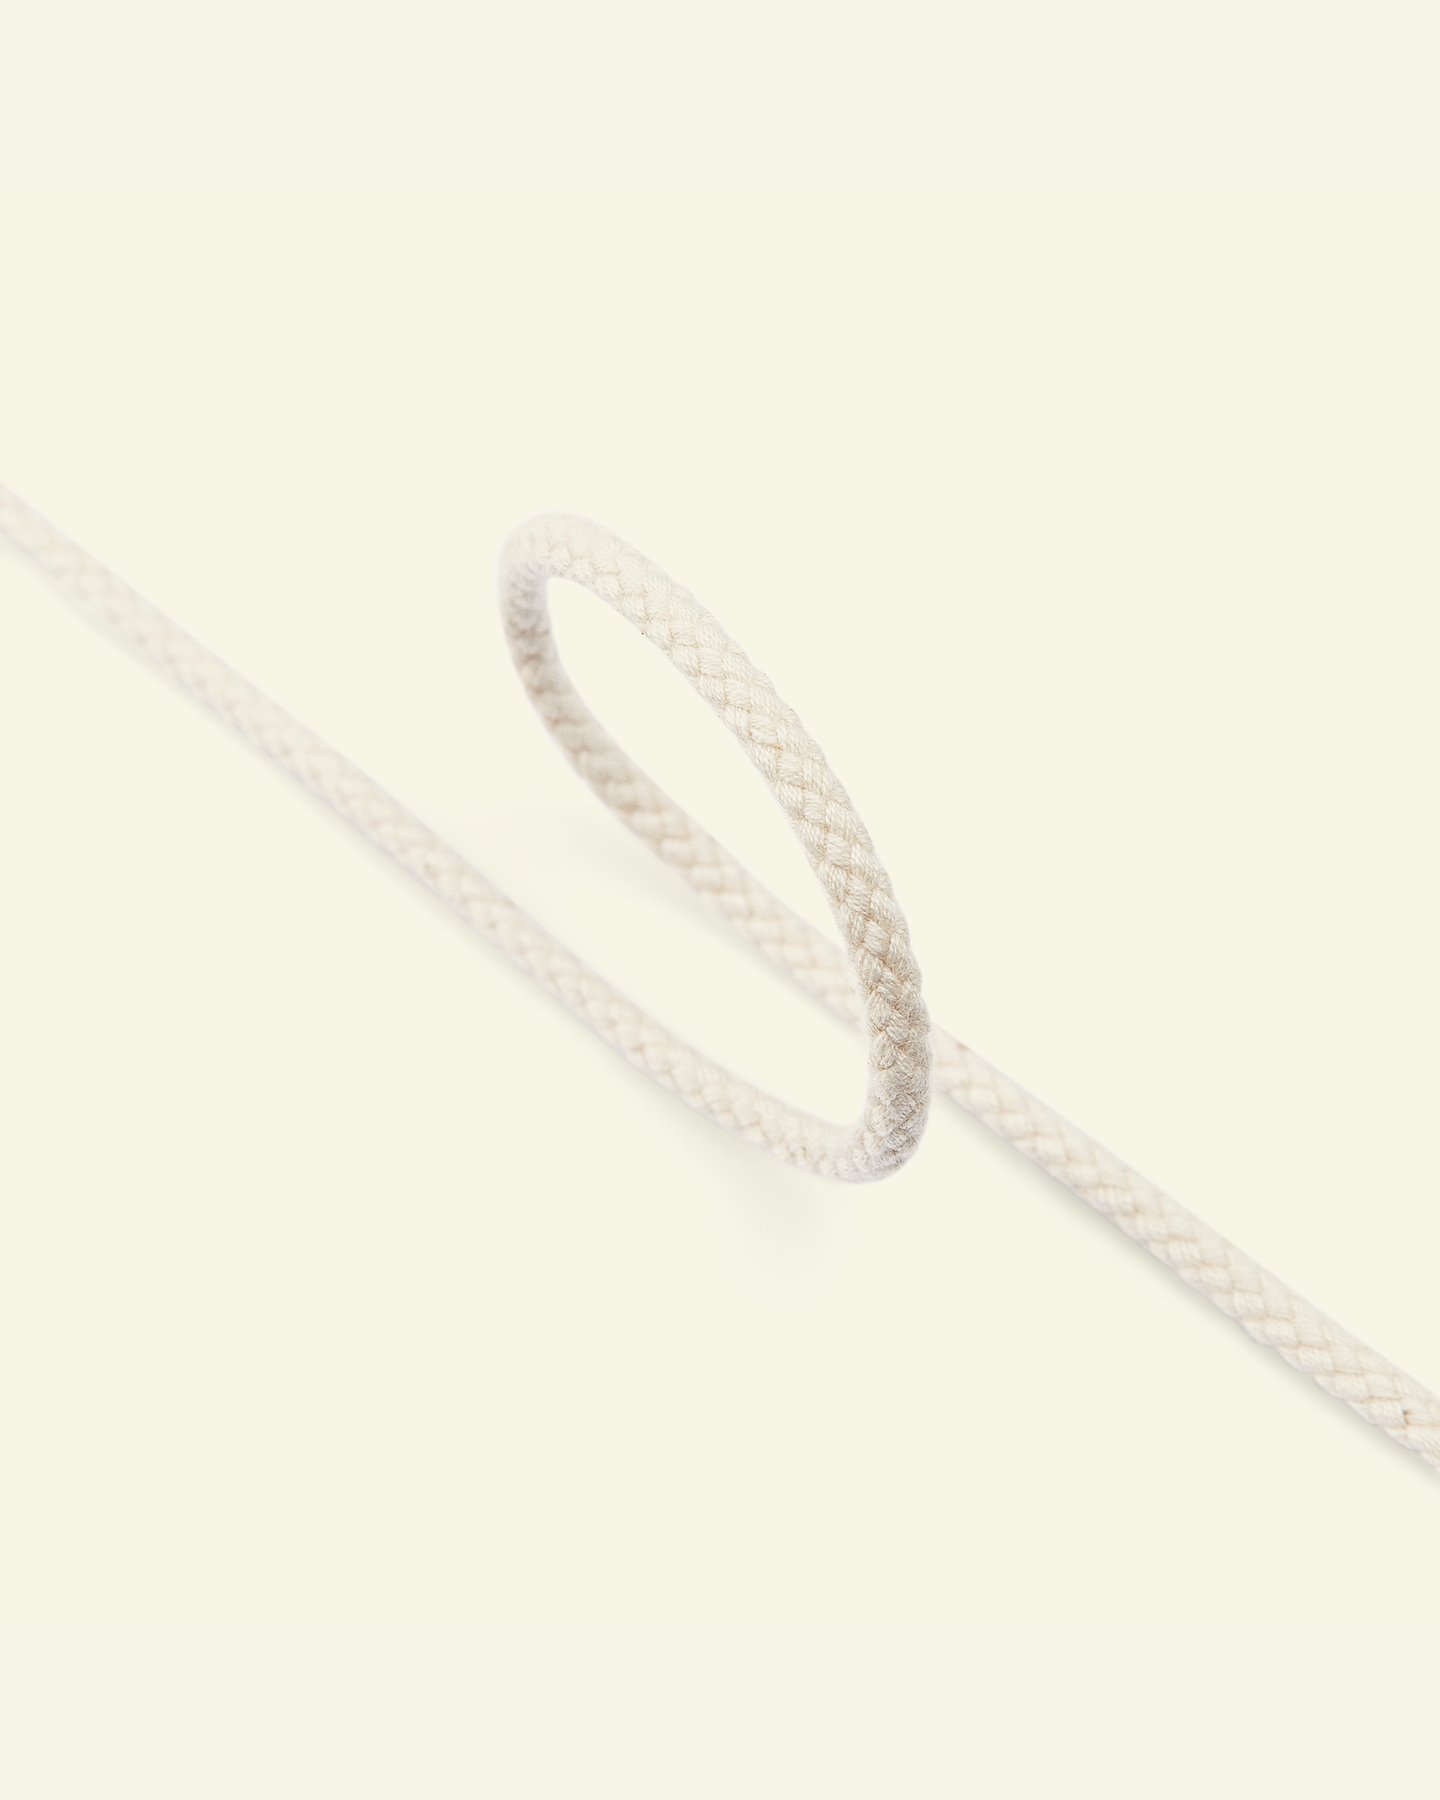 Anorak cord 3,5mm cotton unbleached 5m 75003_pack